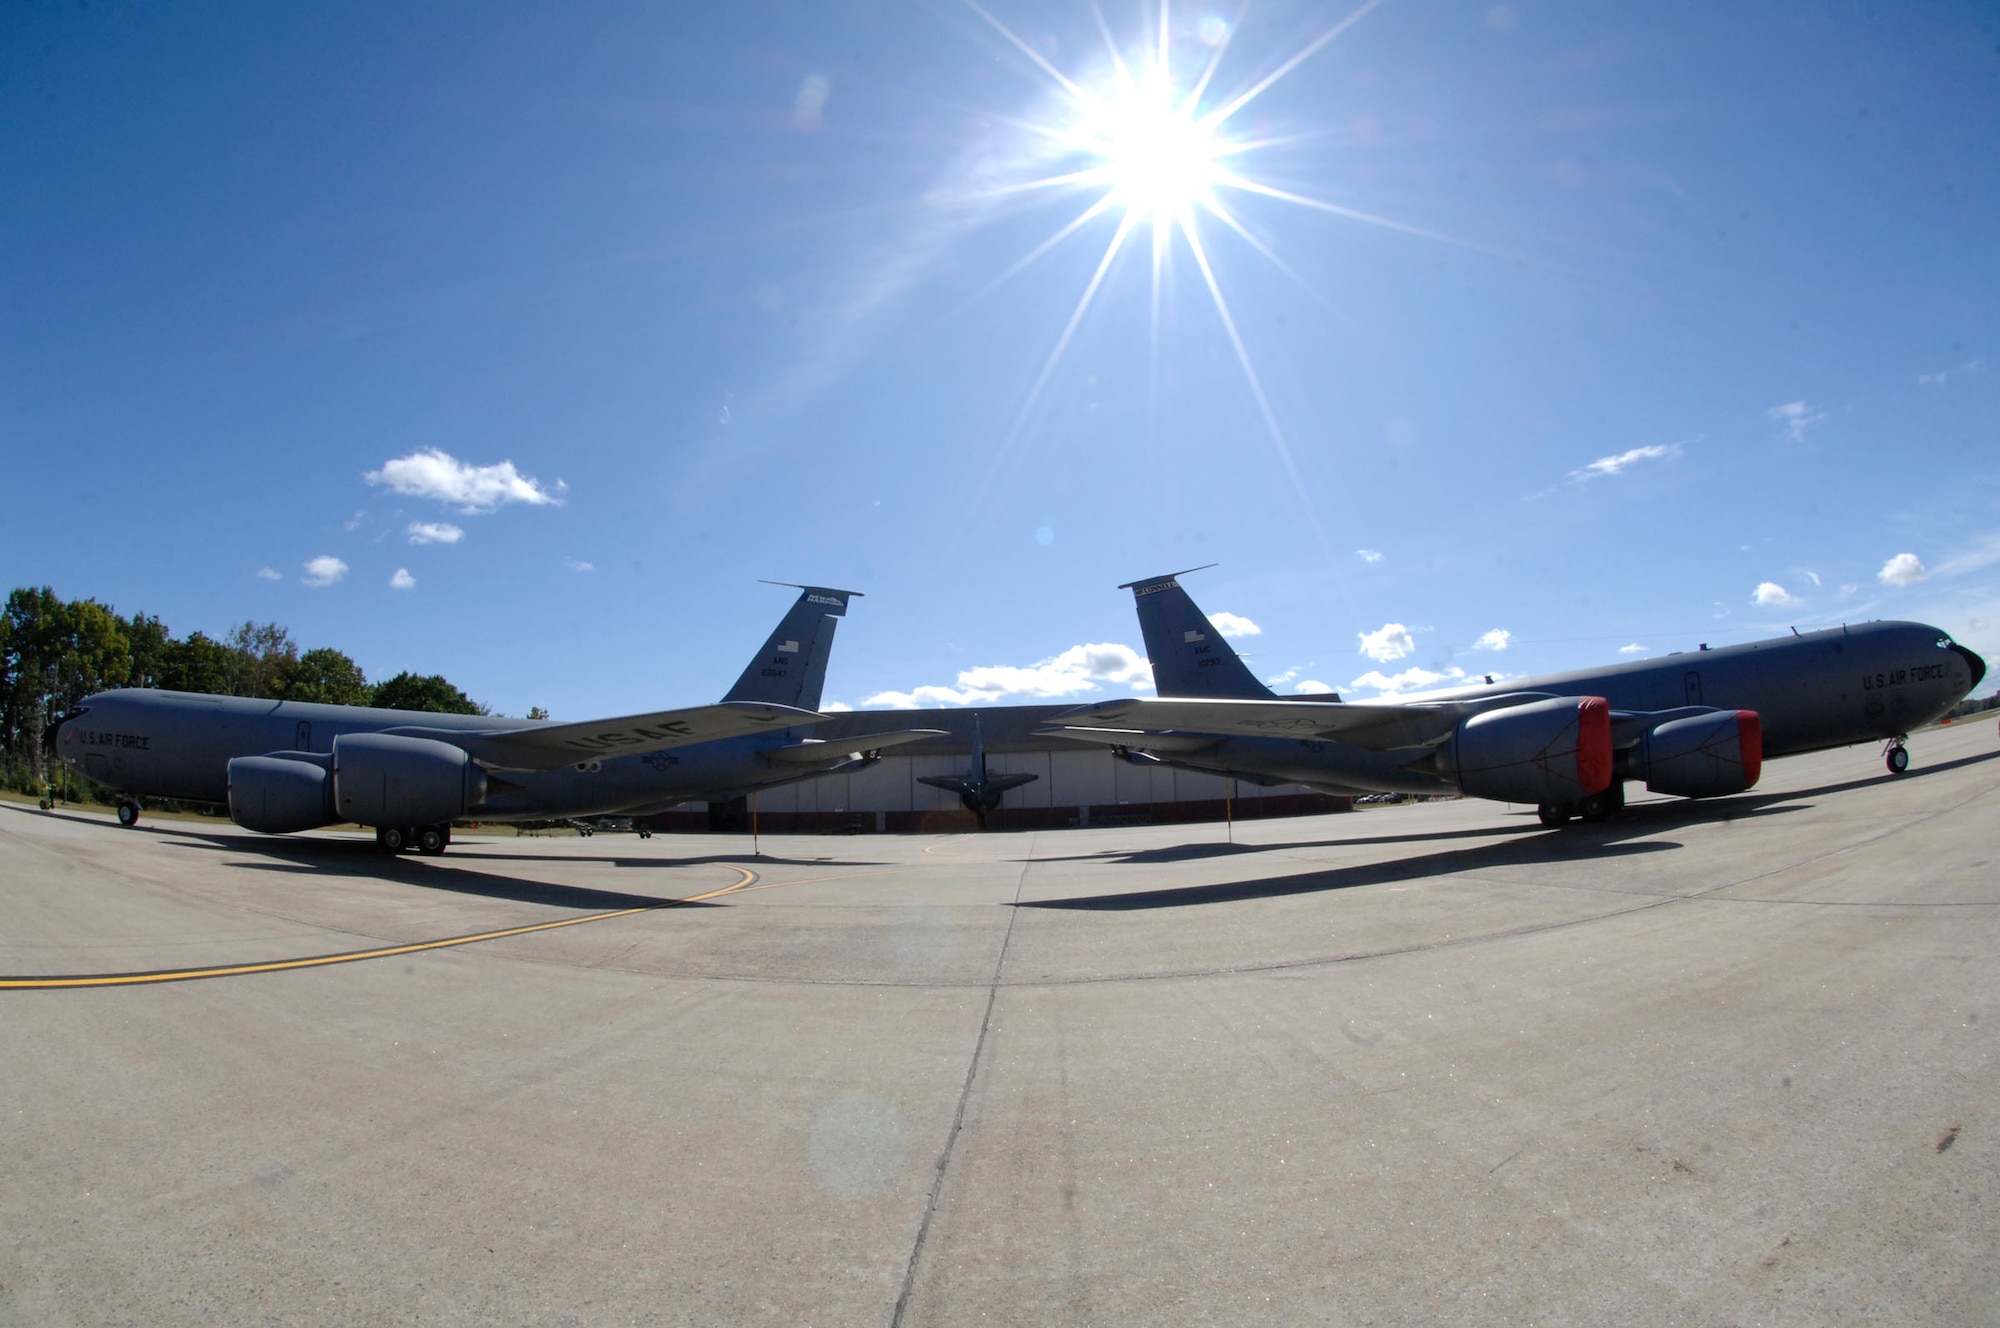 KC-135 Stratotankers from Pease Air National Guard Base, N.H., and McConnell Air Force Base, Kan., stand tail to tail Oct. 2, 2009, at Pease. The aircraft were a backdrop for a military activation ceremony that stood up the 64th Air Refueling Squadron. The 64th ARS is the first of three active-duty air refueling squadrons to become associate units to ANG KC-135 Stratotanker wings by September 2011. (U.S. Air Force photo by Staff Sgt. Amanda Currier)